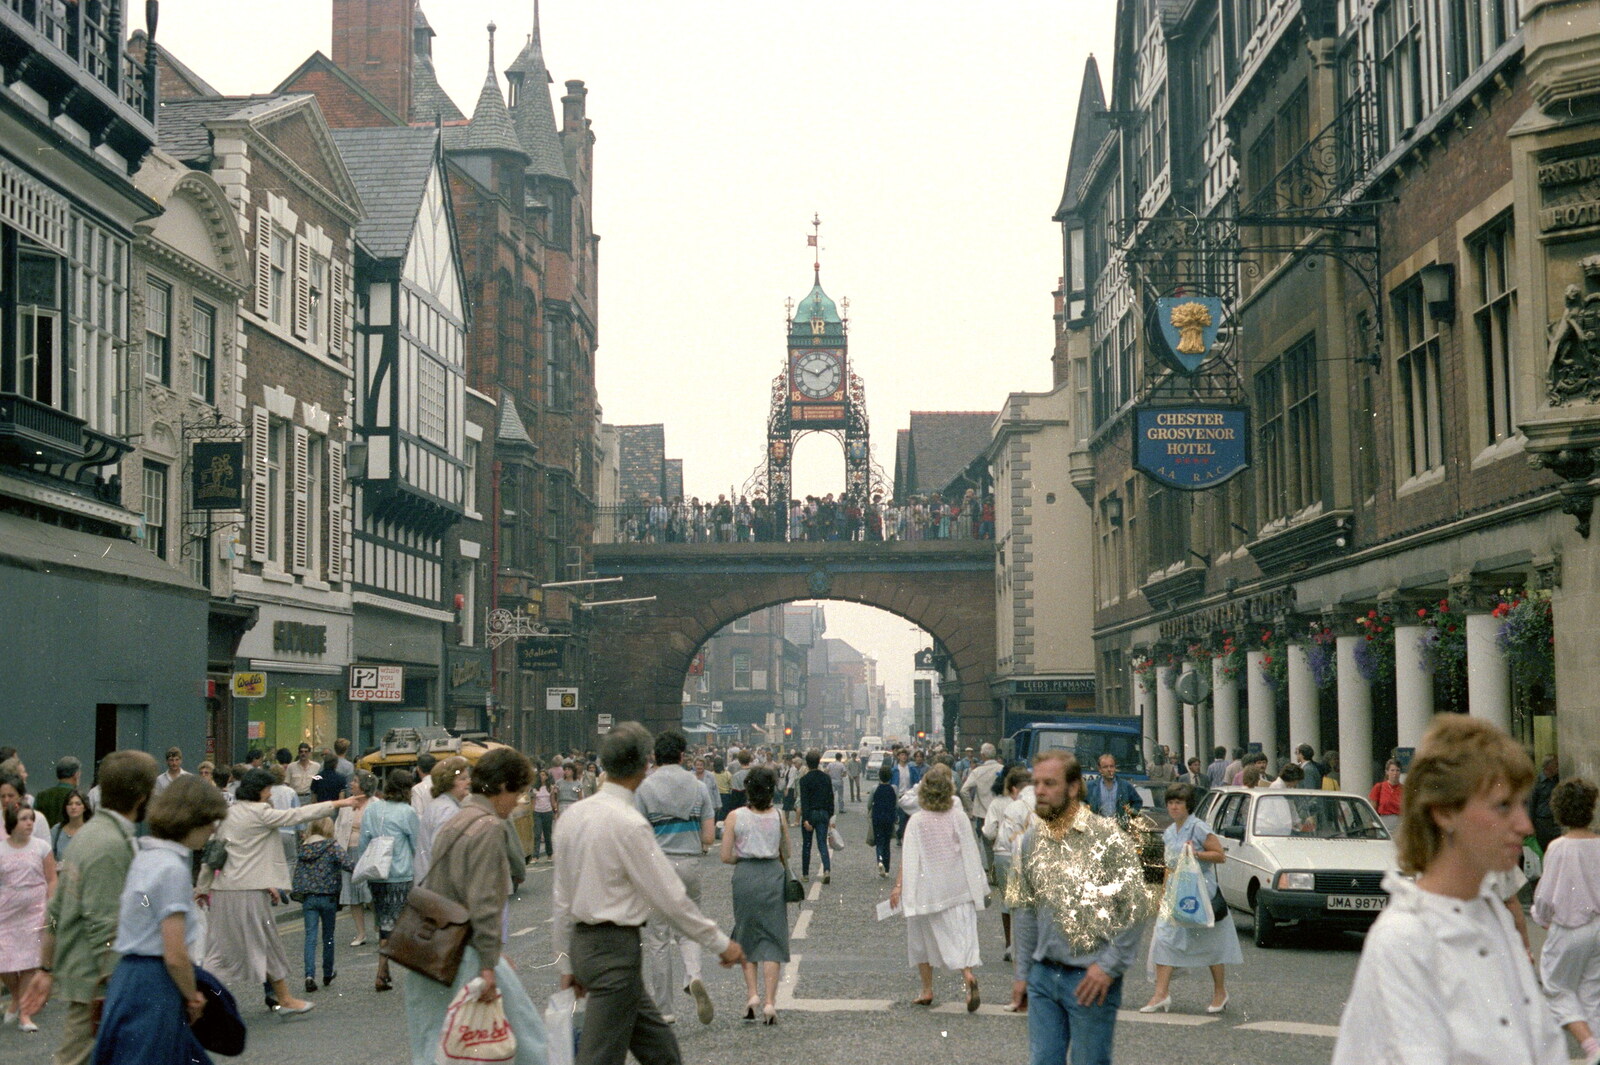 East Gate, in The middle of Chester from Nosher Goes Windsurfing, Macclesfield, Cheshire - 20th June 1985